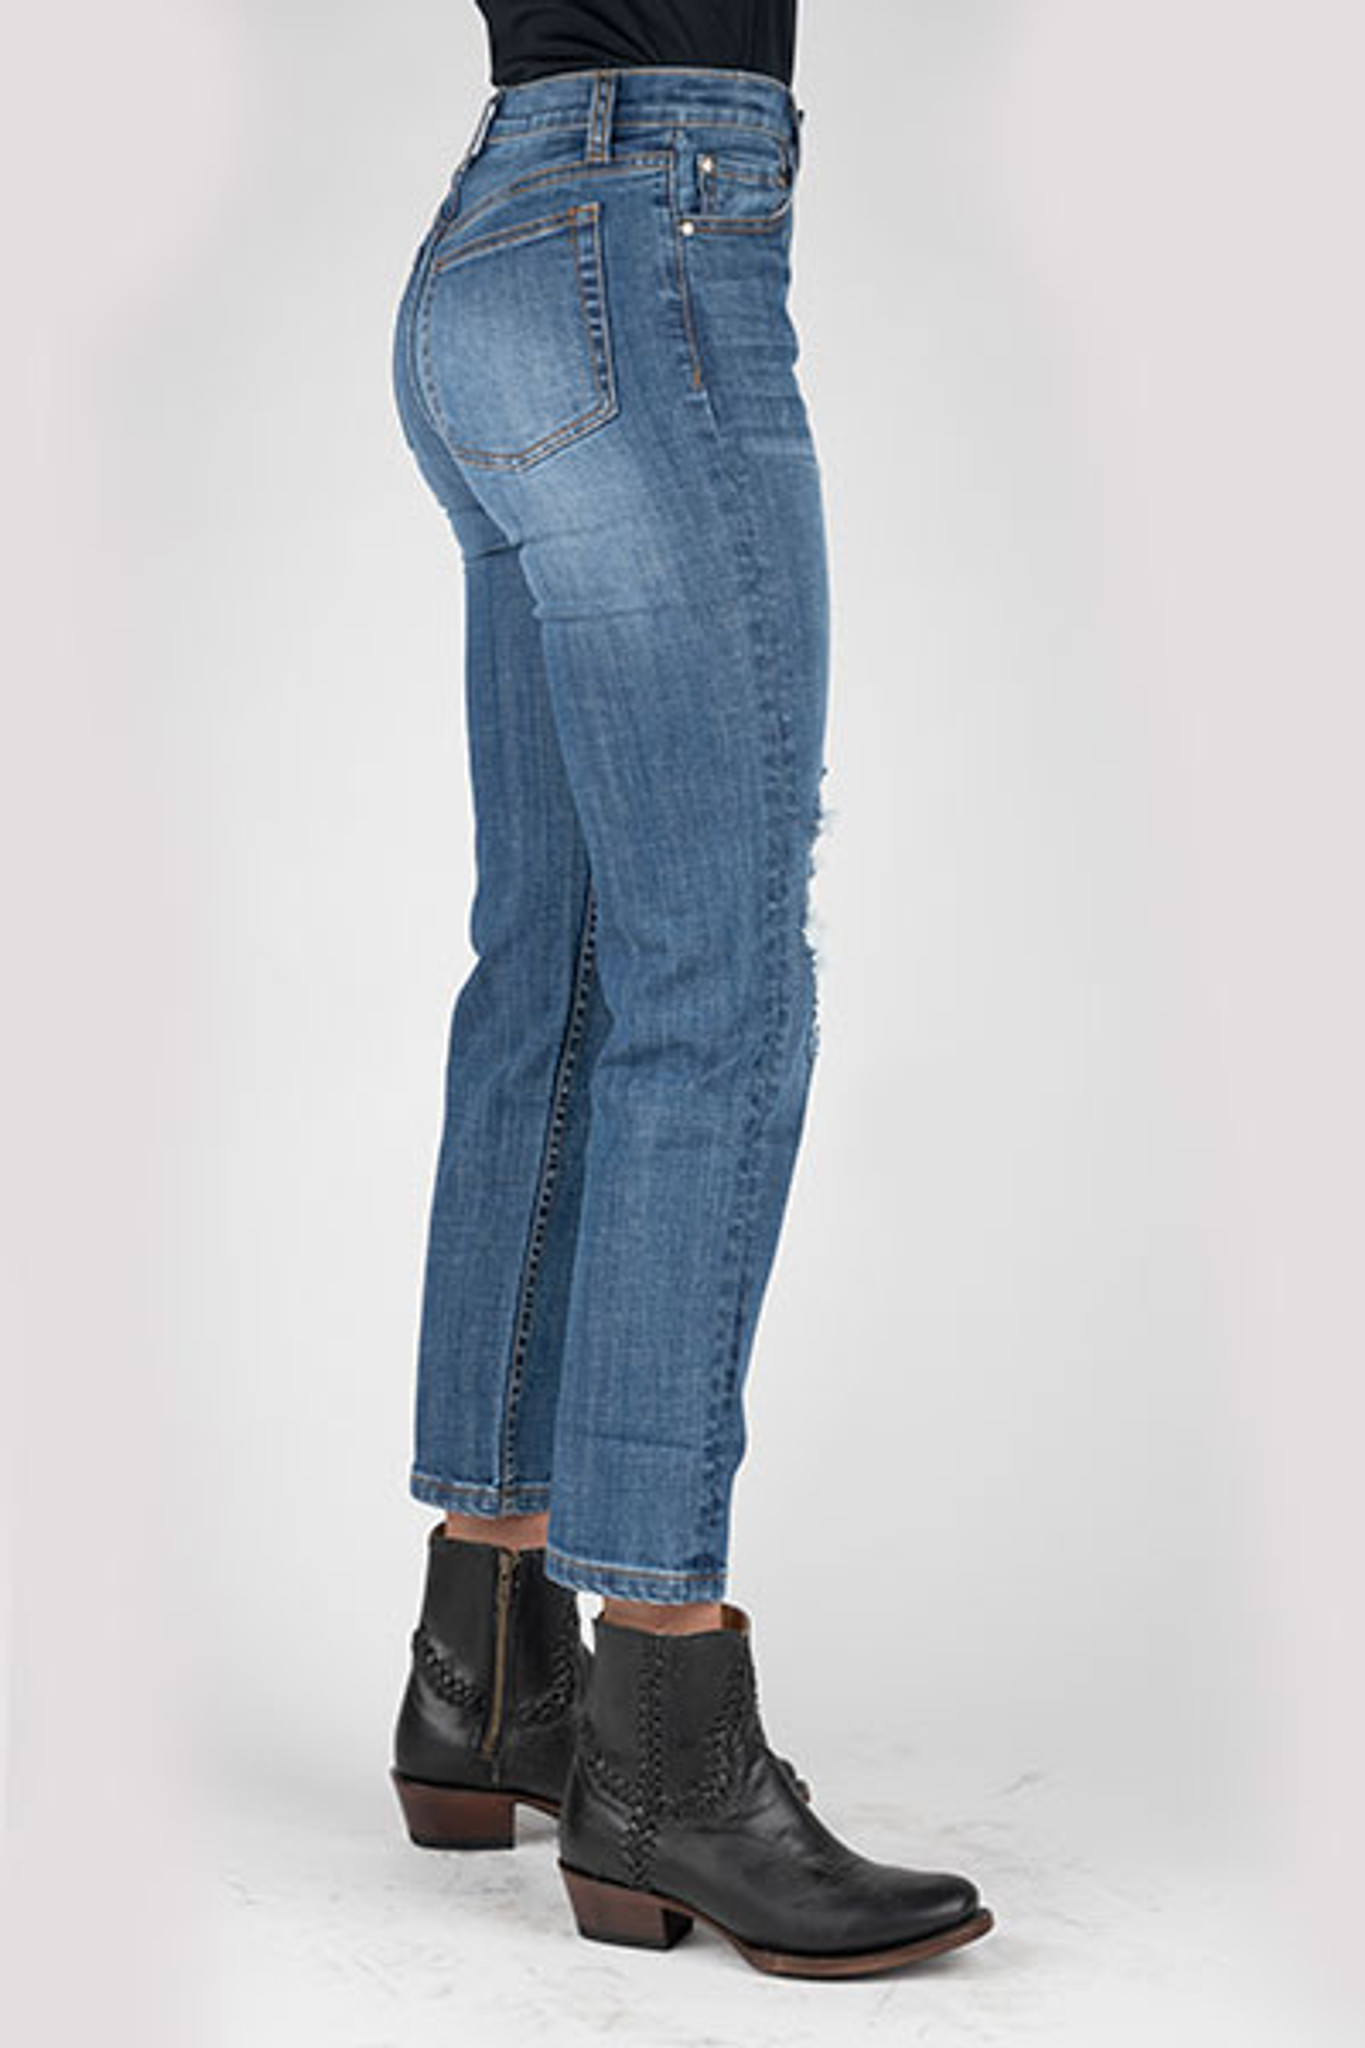 Women's Tin Haul Jeans, 525 Rachels, High Rise Straight Crop - Chick Elms  Grand Entry Western Store and Rodeo Shop